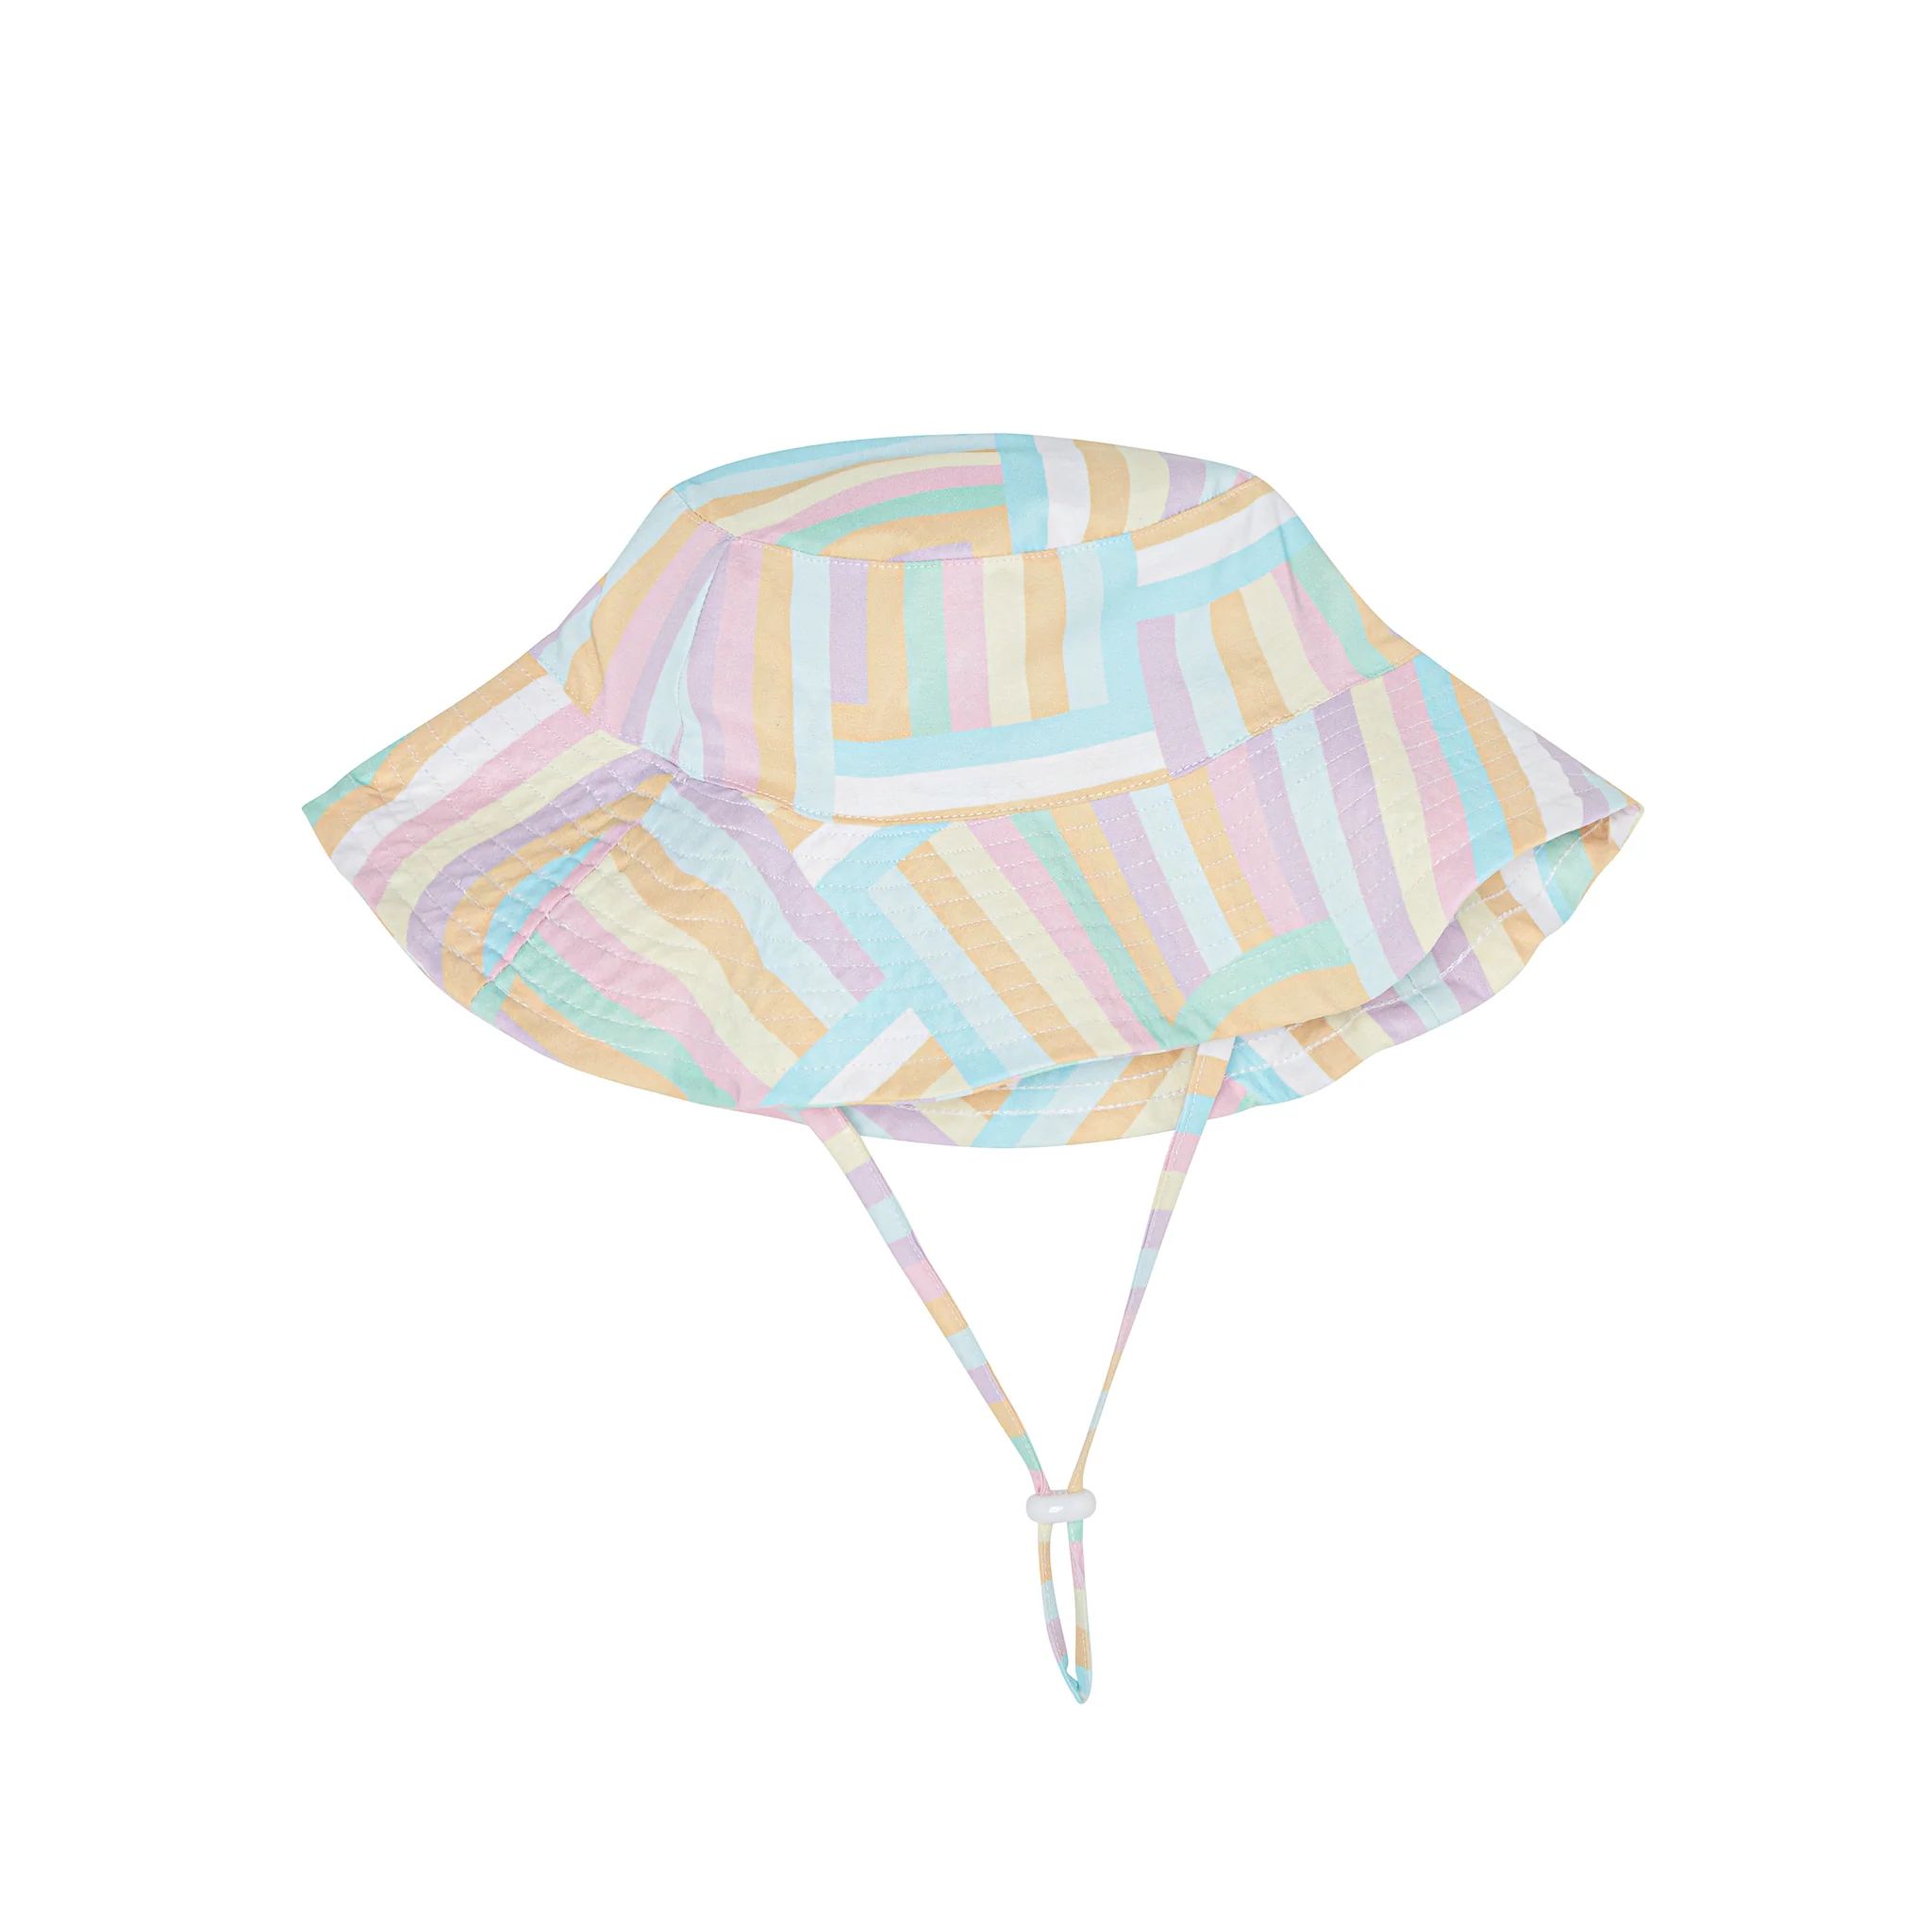 The North Shore Bucket Hat - Boys and Girls, Infant, Toddler, Kids Beach Hat UPF 50+ | Kenny Flowers